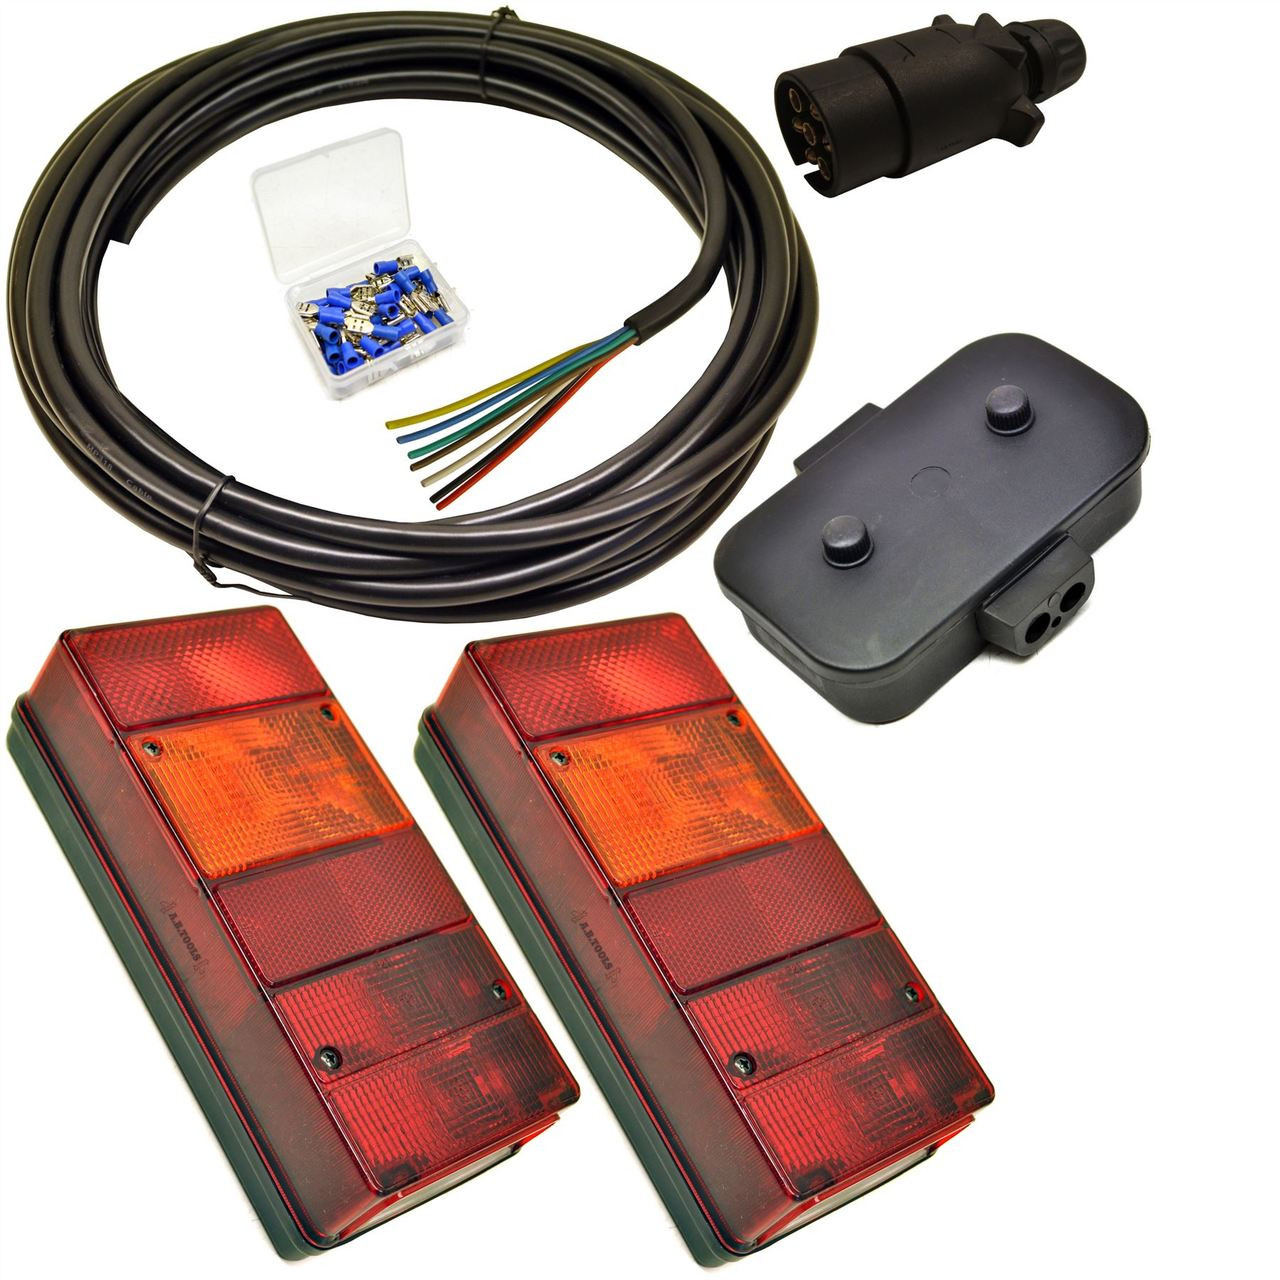 Trailer Light Wiring Kit  Large Lights, Plug, Junction Box, 5m Wire, Terminals